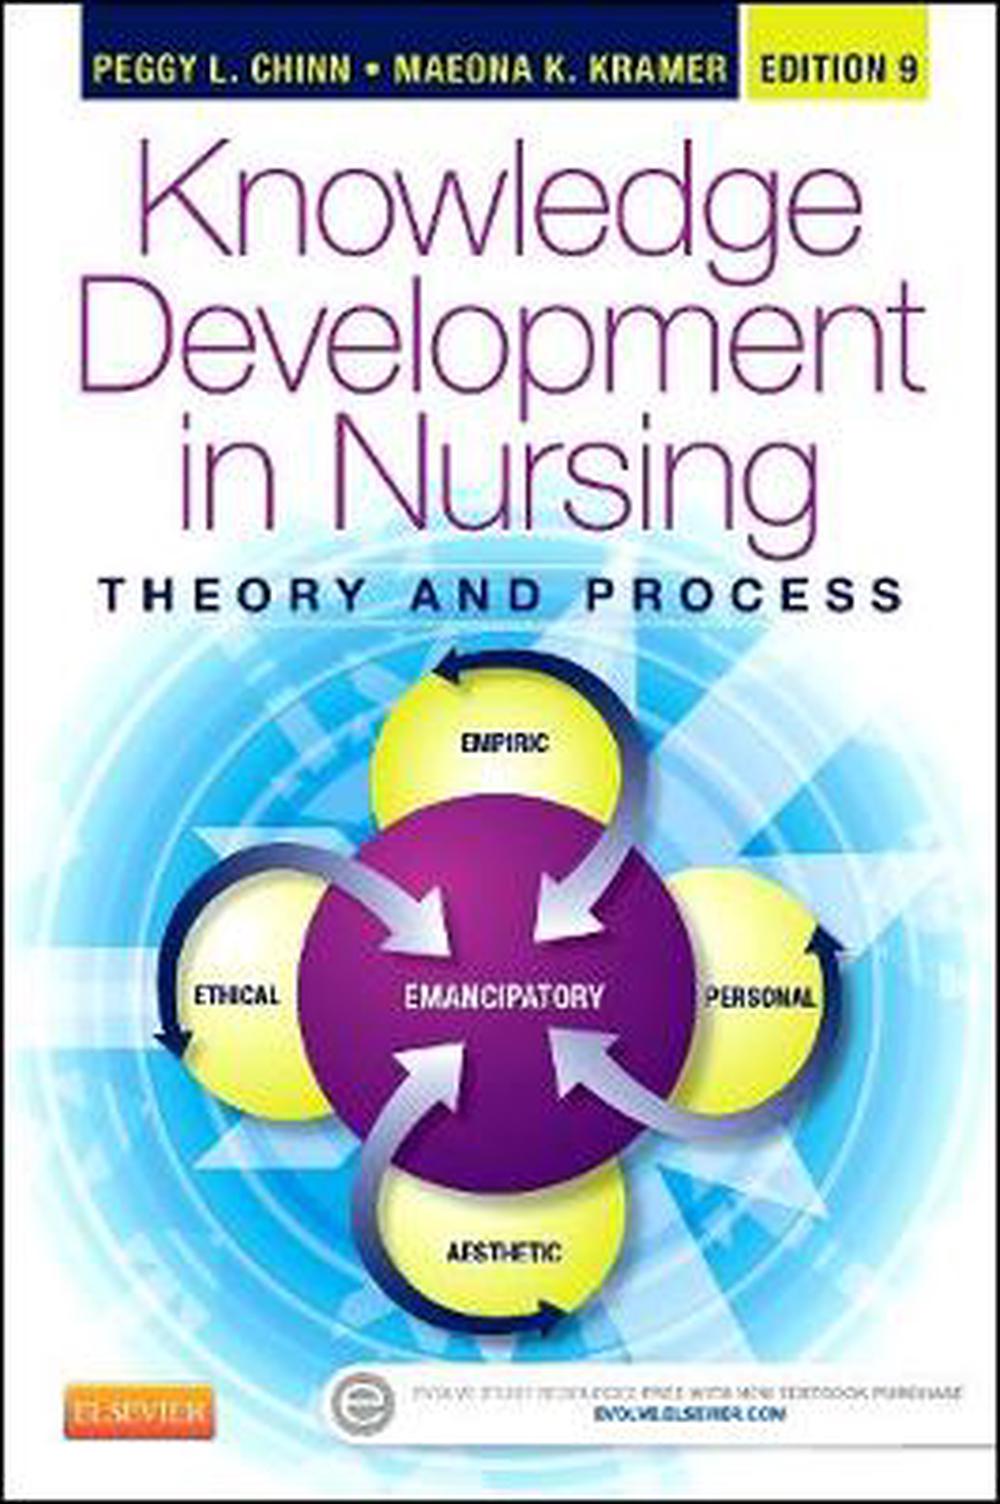 Knowledge Development in Nursing Theory and Process by Peggy L. Chinn (English) 9780323316521